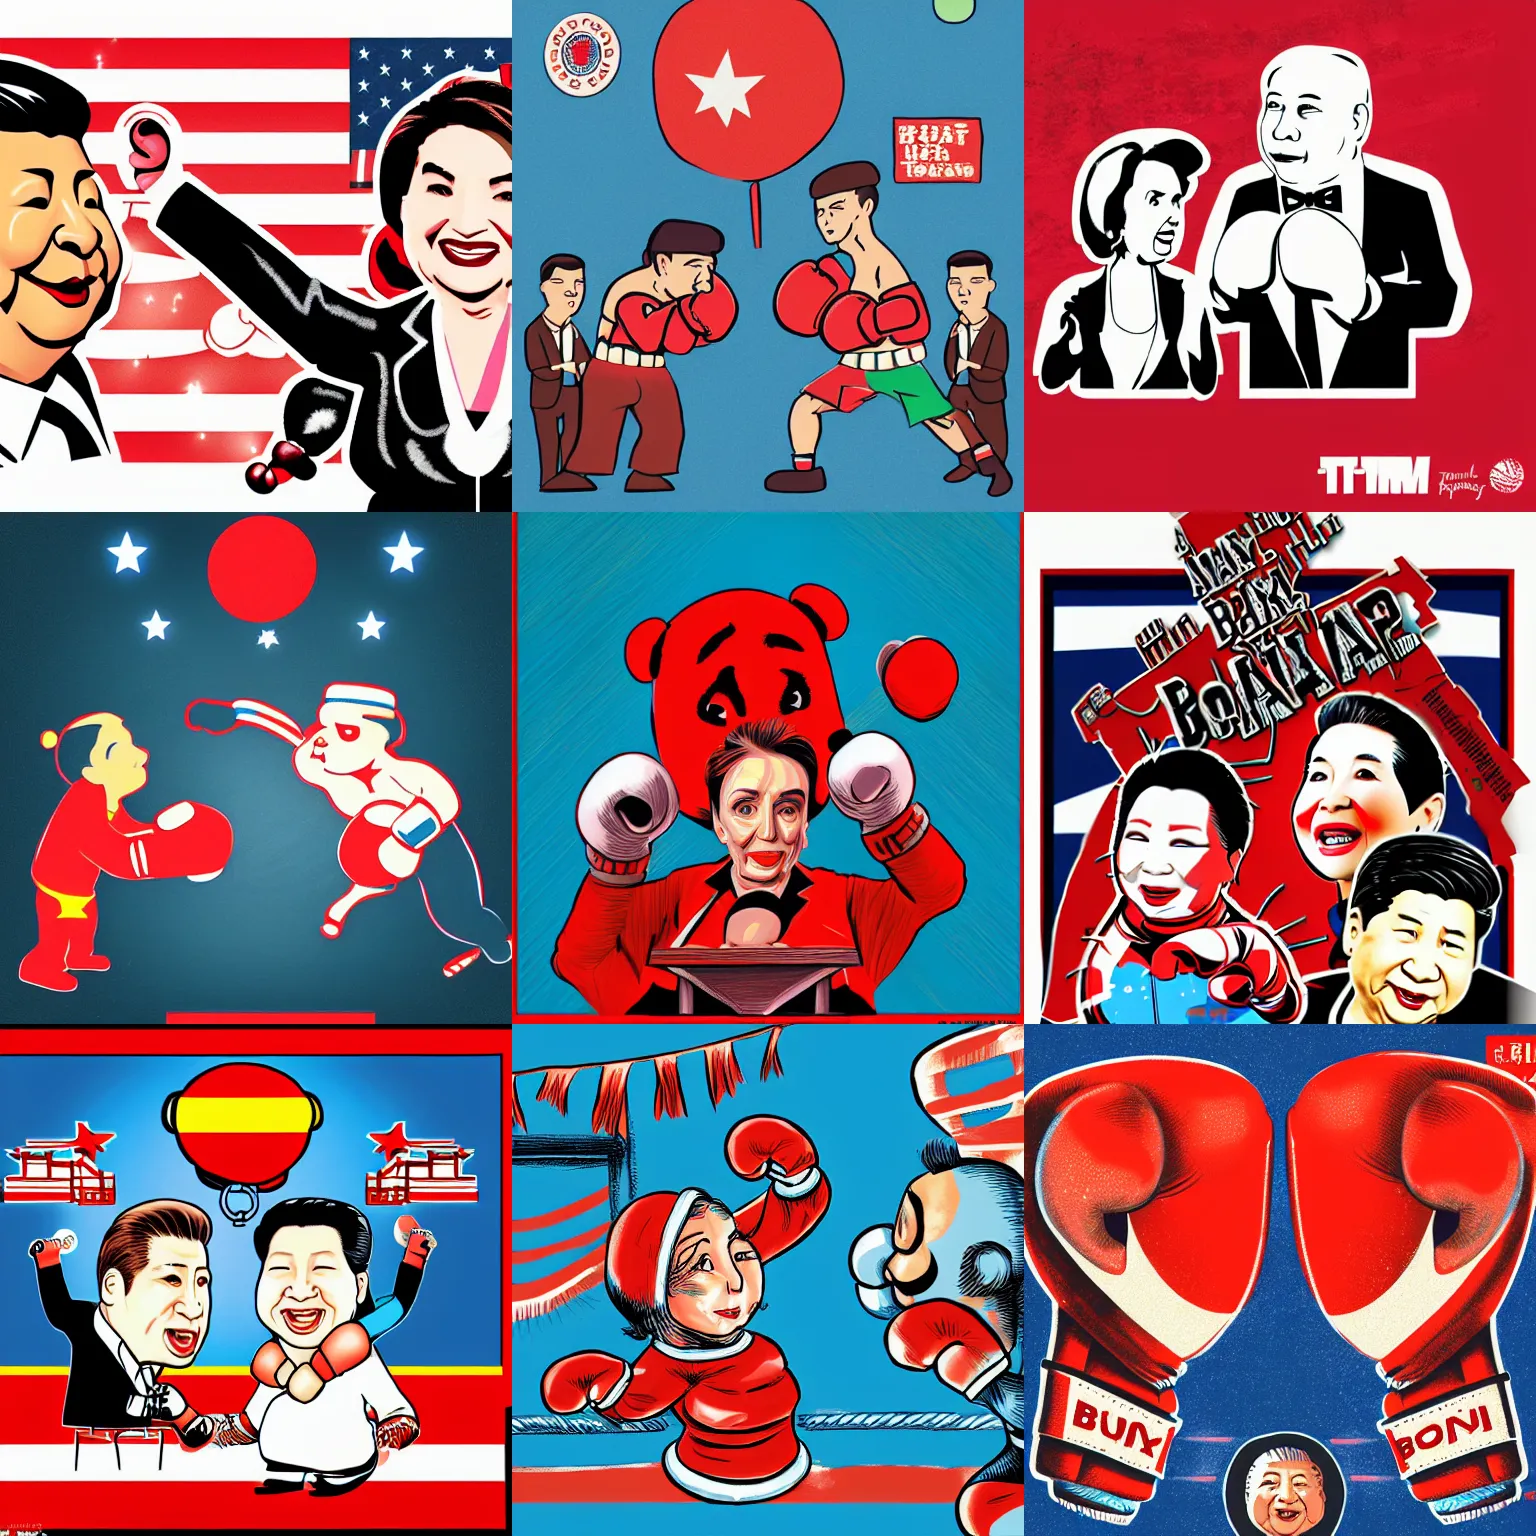 Prompt: nancy pelosi xi jinping boxing match, detailed illustration by tim doyle